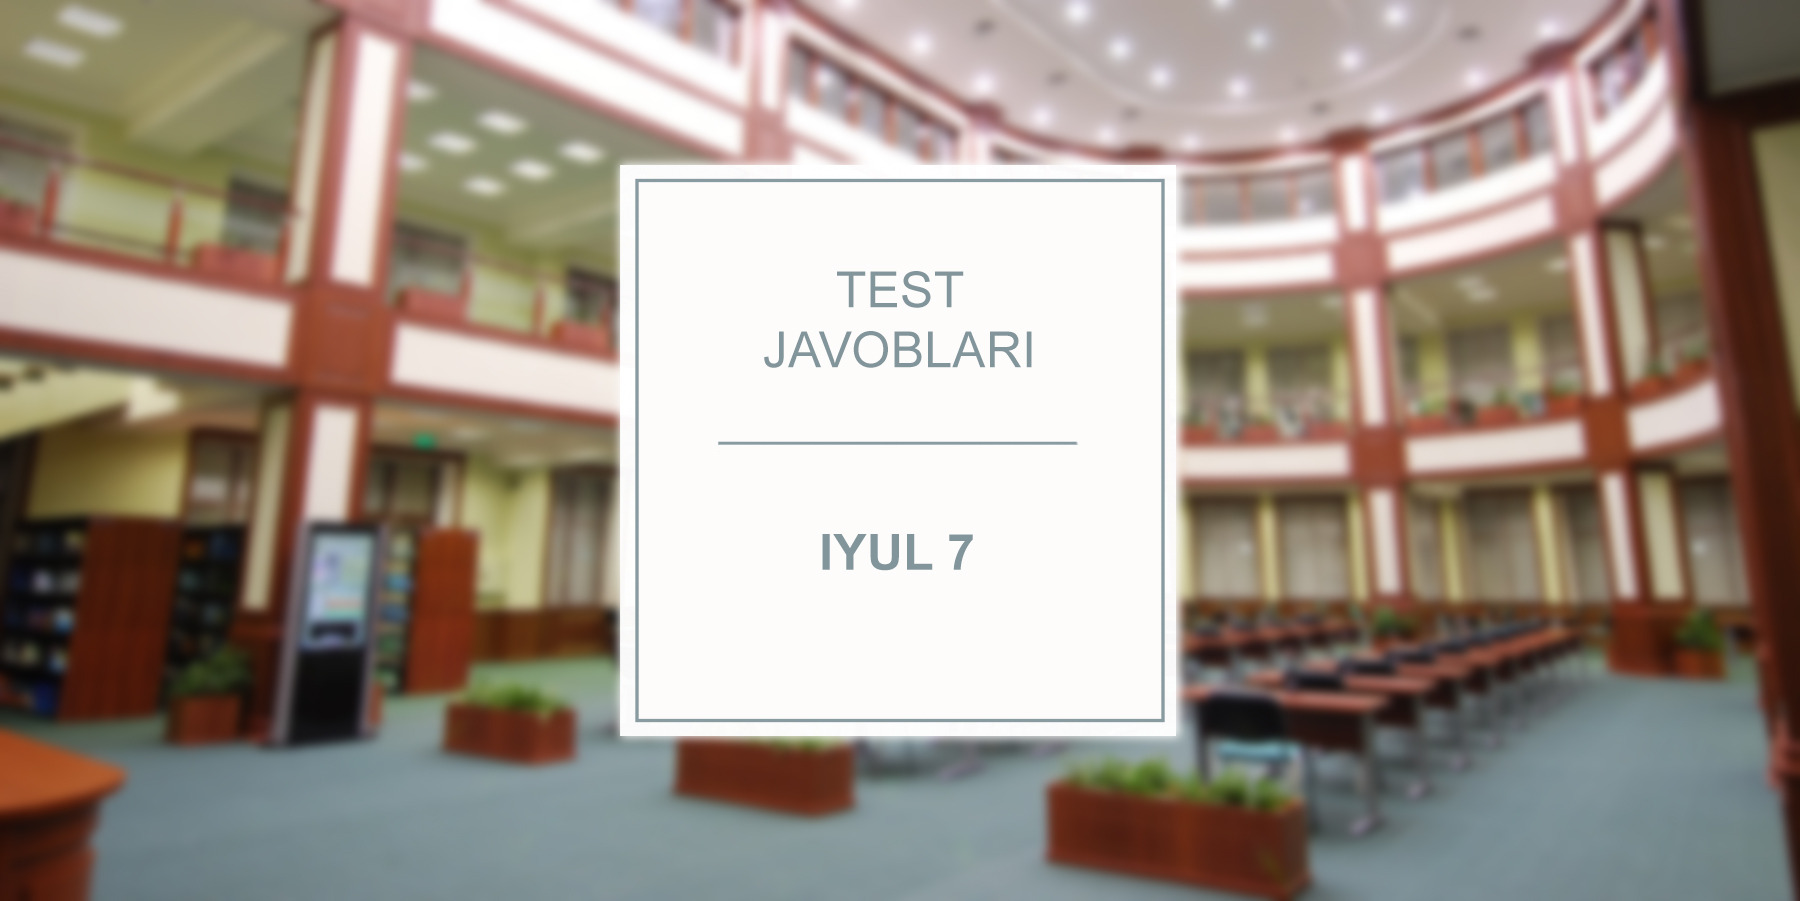 You are currently viewing Test javoblari